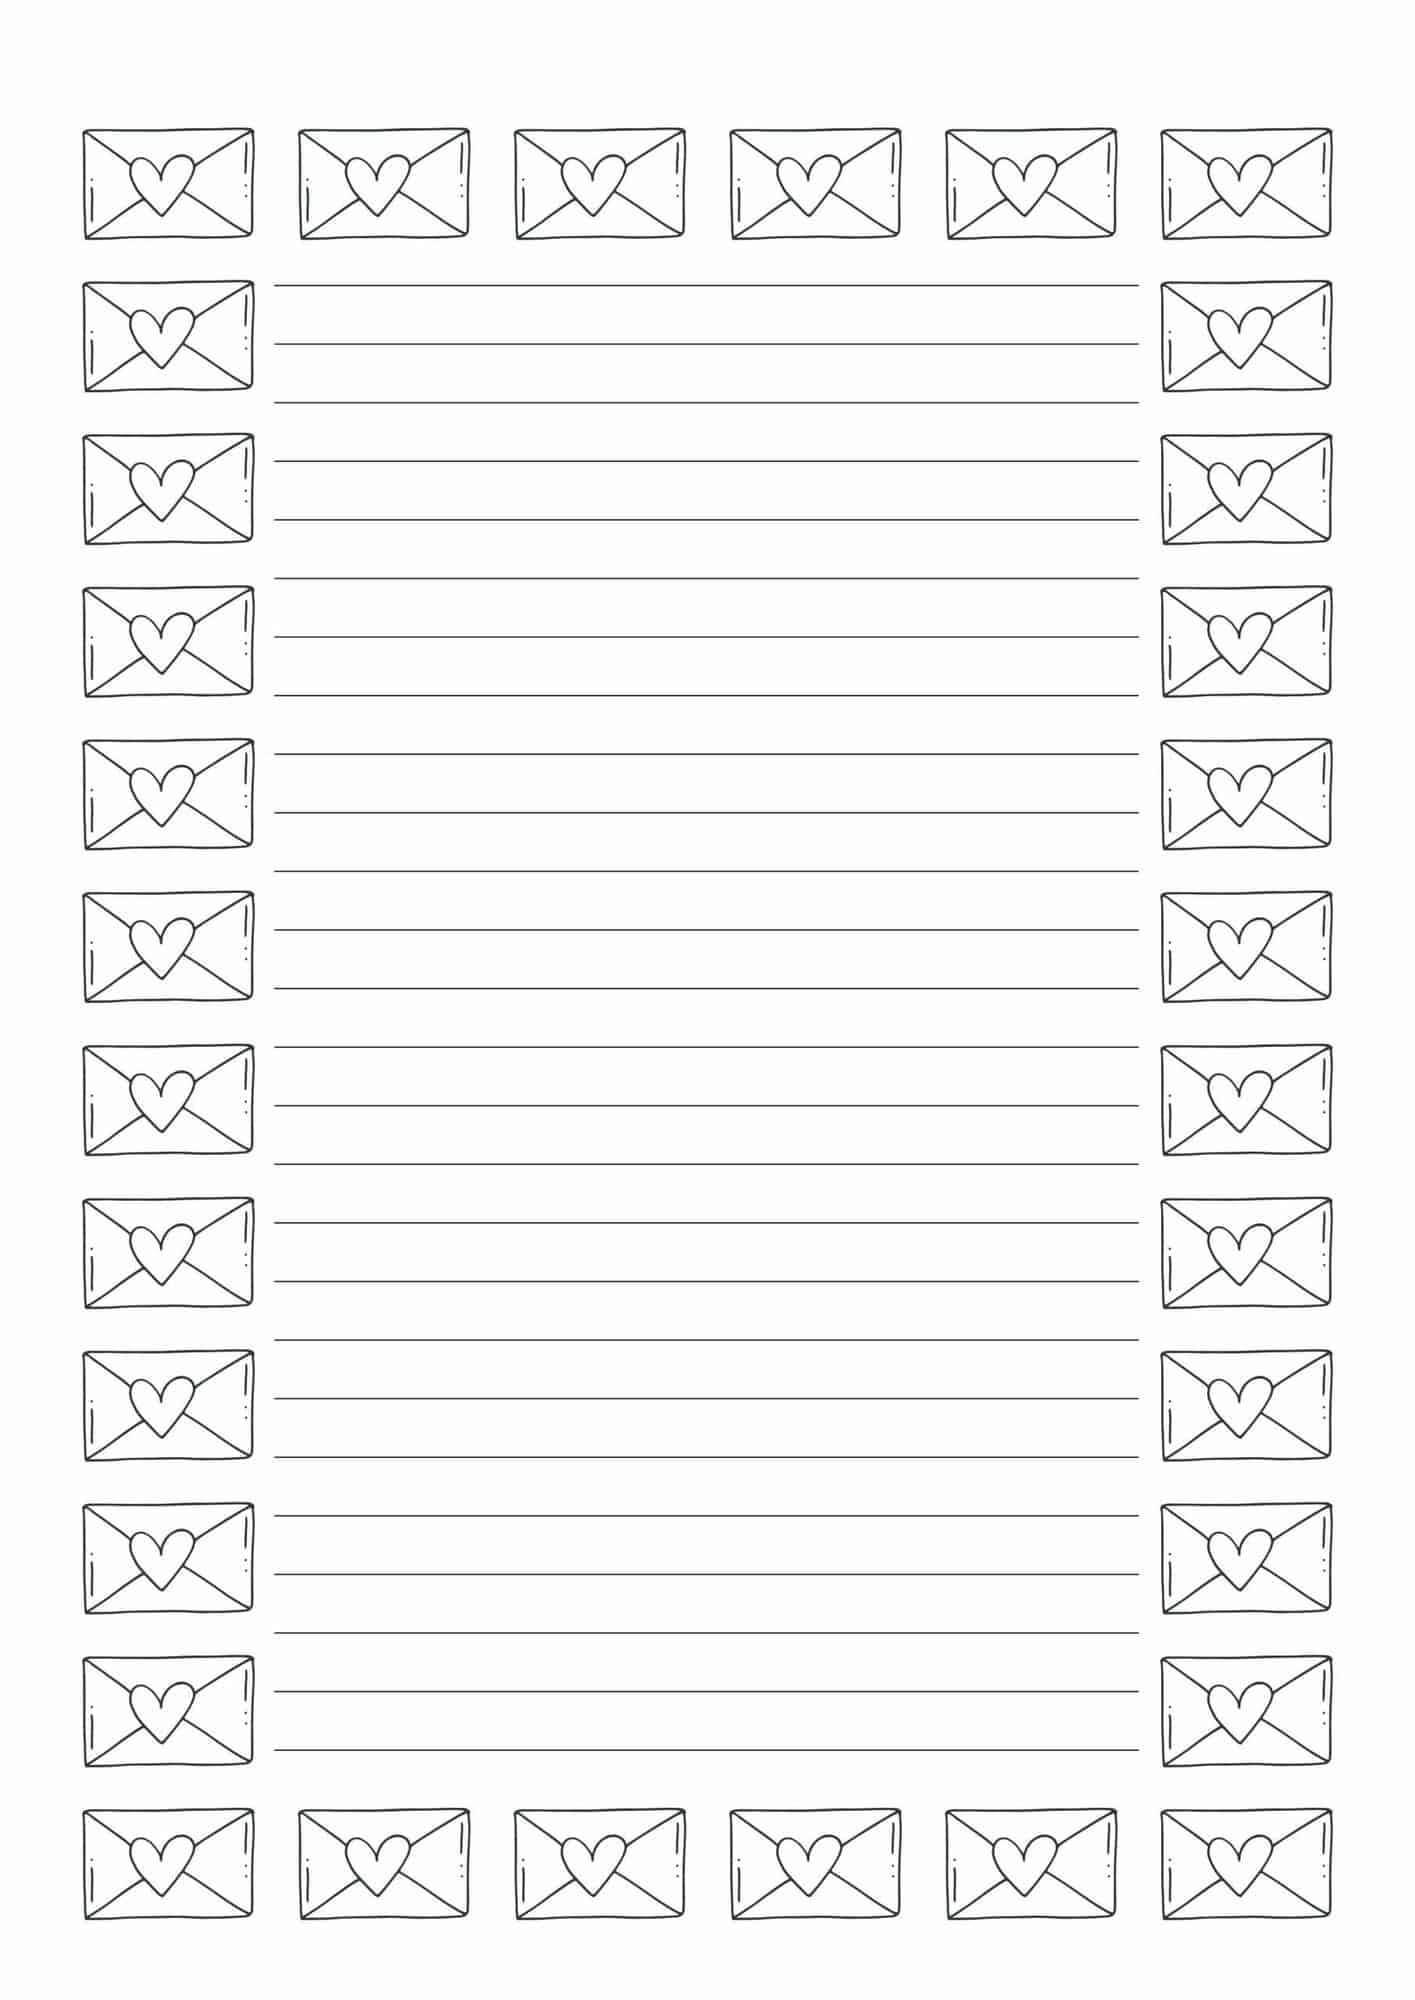 Cute lined paper printable template with envelope hearts border.